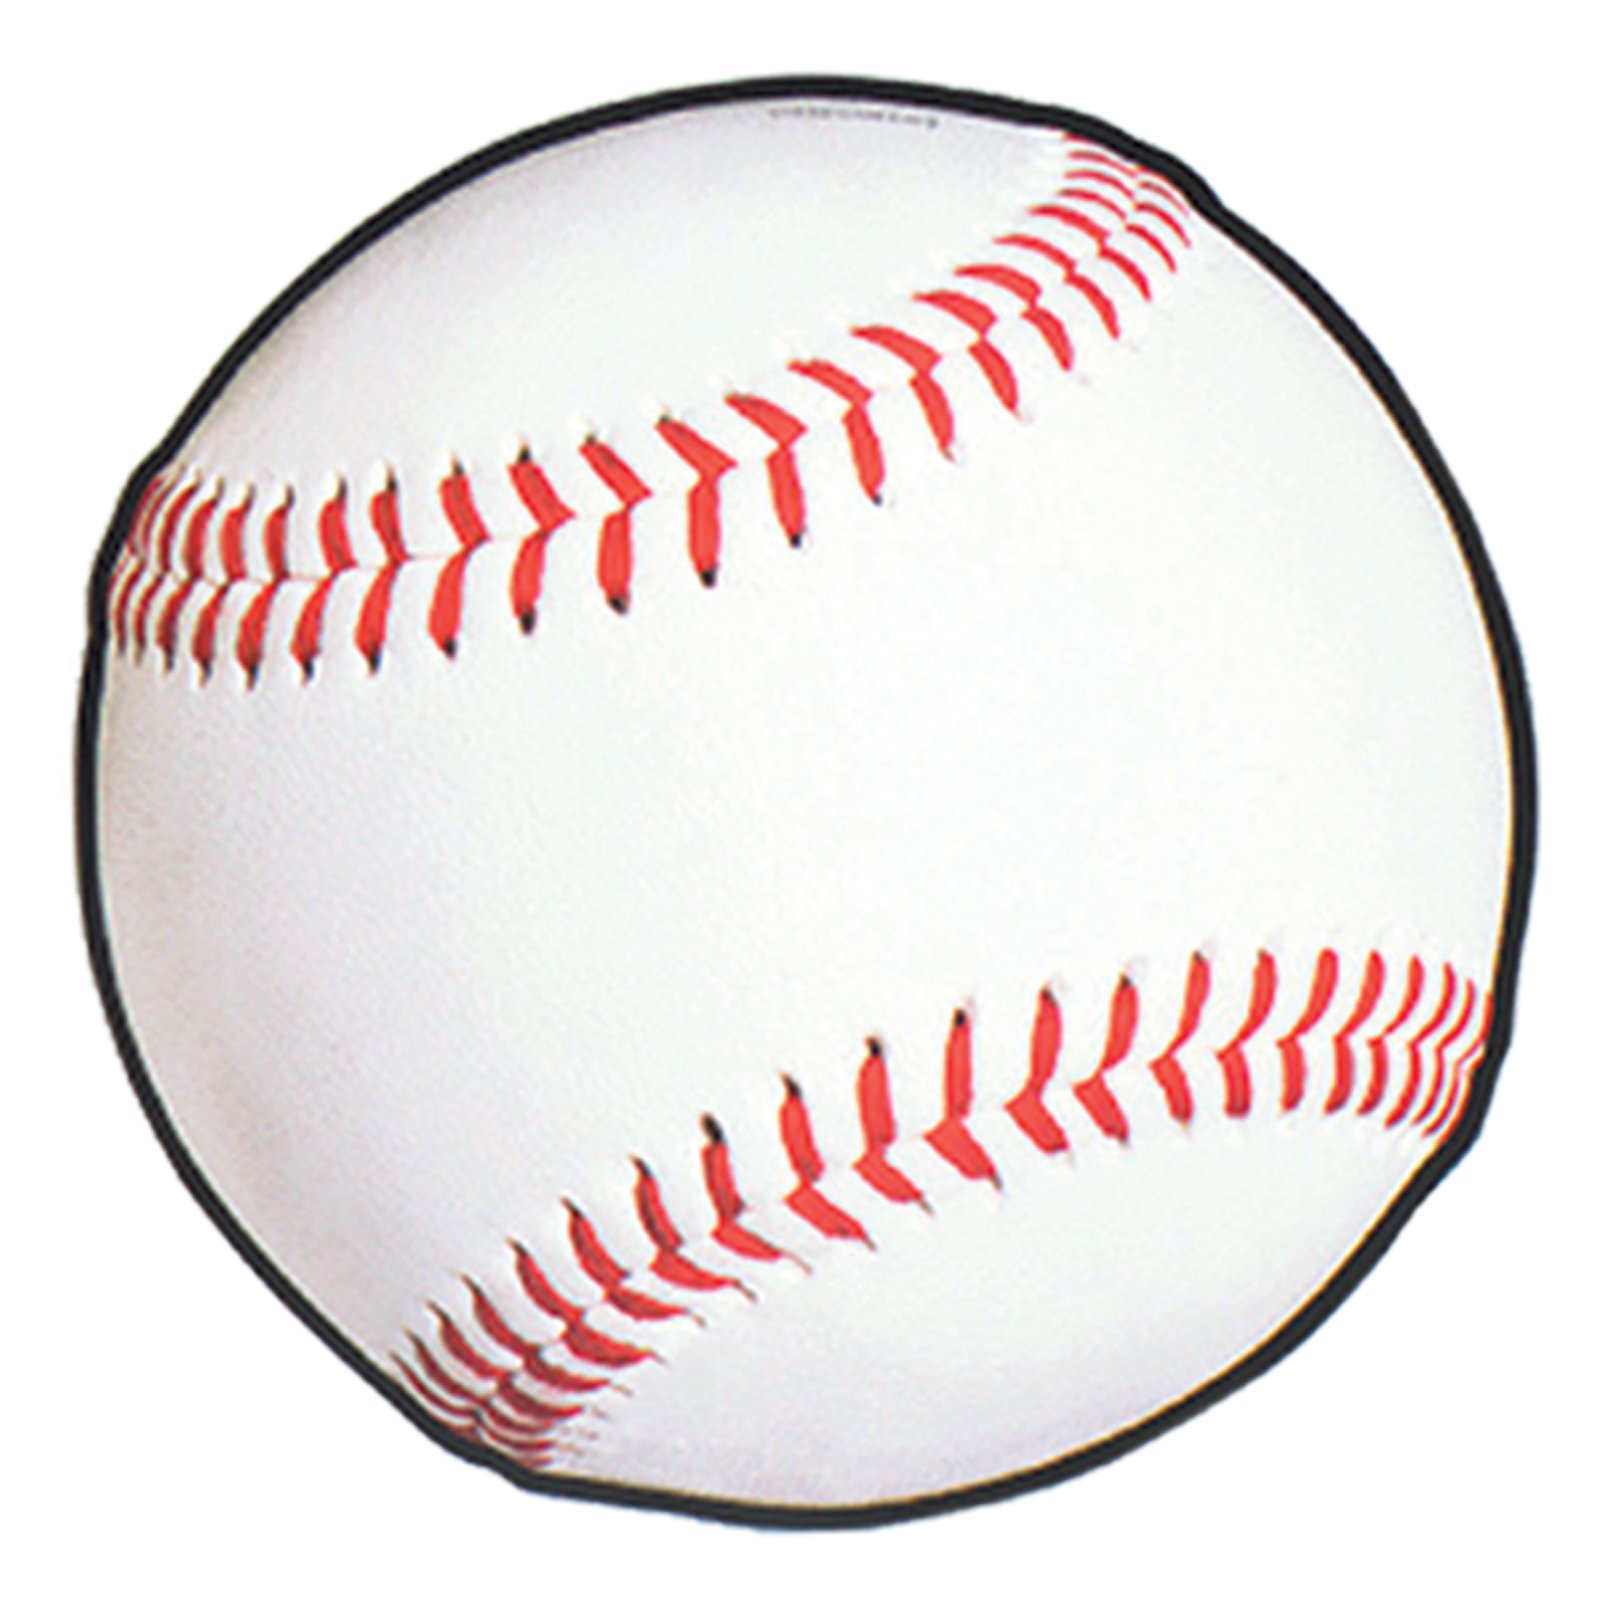 Free Baseball Pictures Images, Download Free Clip Art, Free